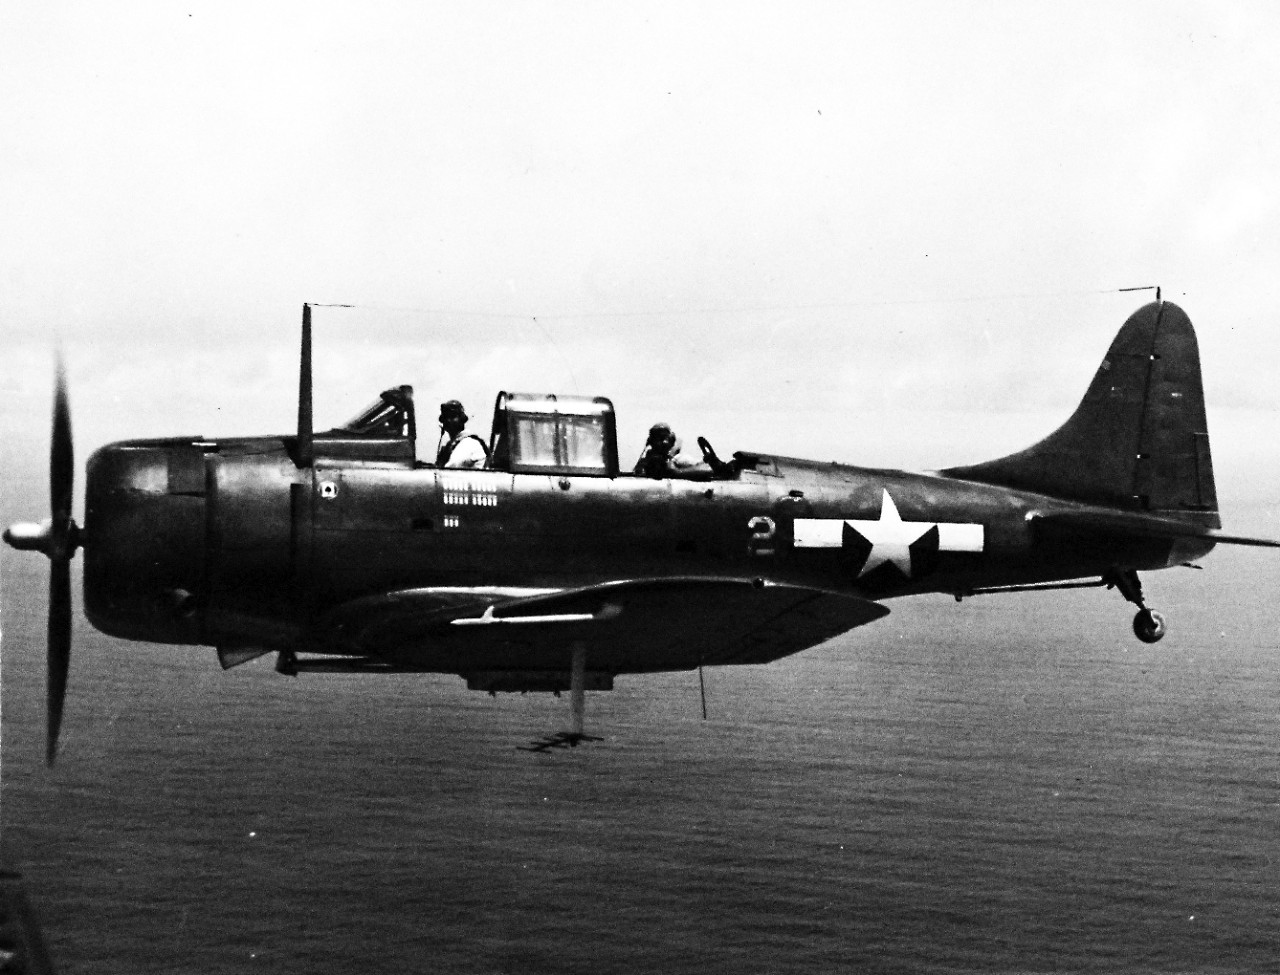 80-G-234791:  SBD-5 over Majuro Atoll, 1944.   Aircraft was from USS Lexington (CV-16).    Photograph released May 13, 944.  Aircraft was piloted by Captain Bell, USMC, VMSB 231 and was carrying a Navy photographer.      Official U.S. Navy photograph, now in the collections of the National Archives.  (2016/11/15).